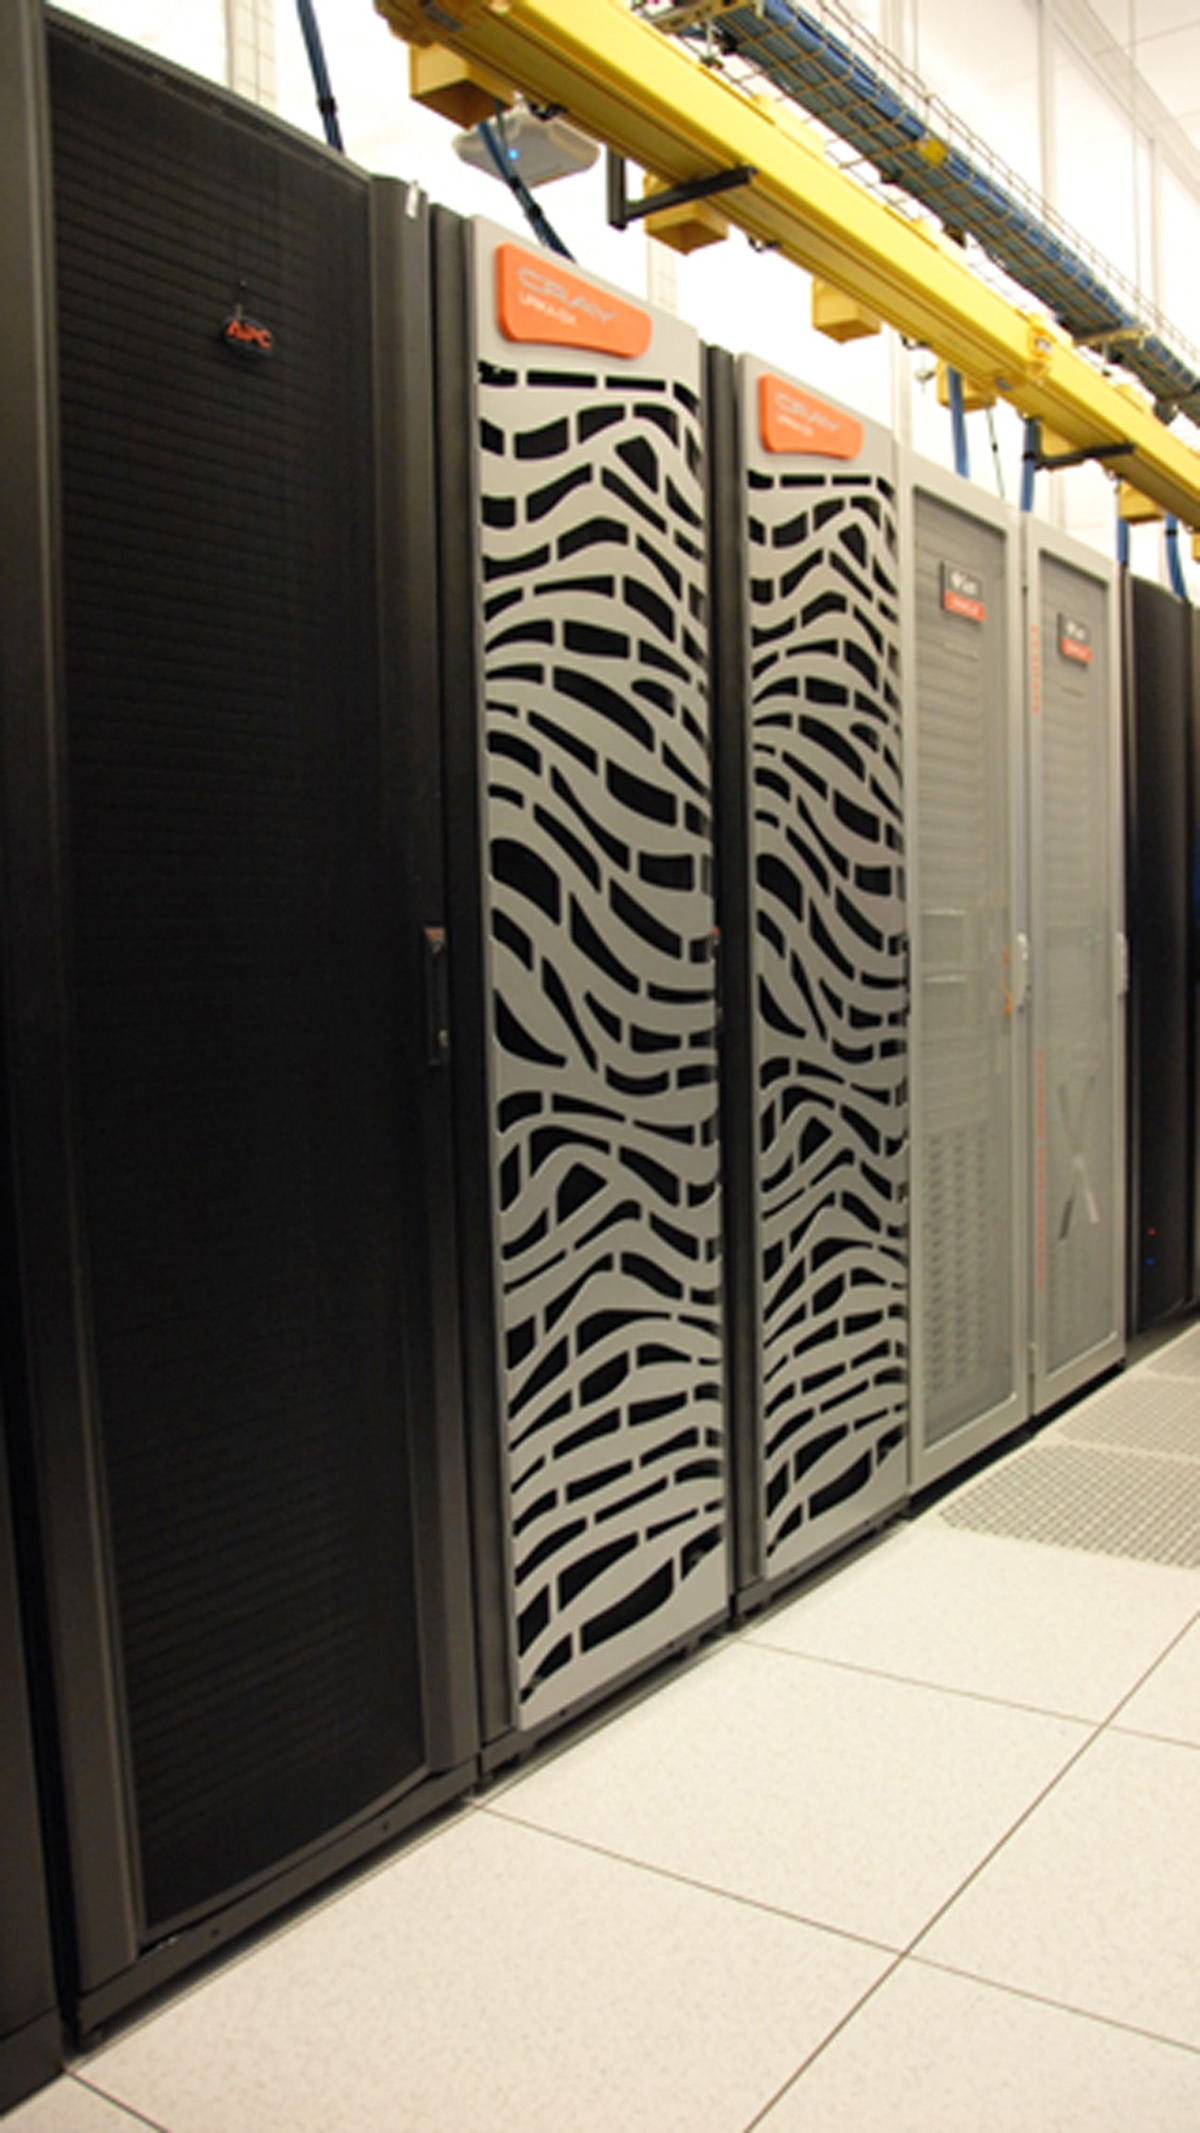 The Cray/HPE Urika-GX data mining supercomputer installed on the Mayo Clinic Campus in Rochester, MN.